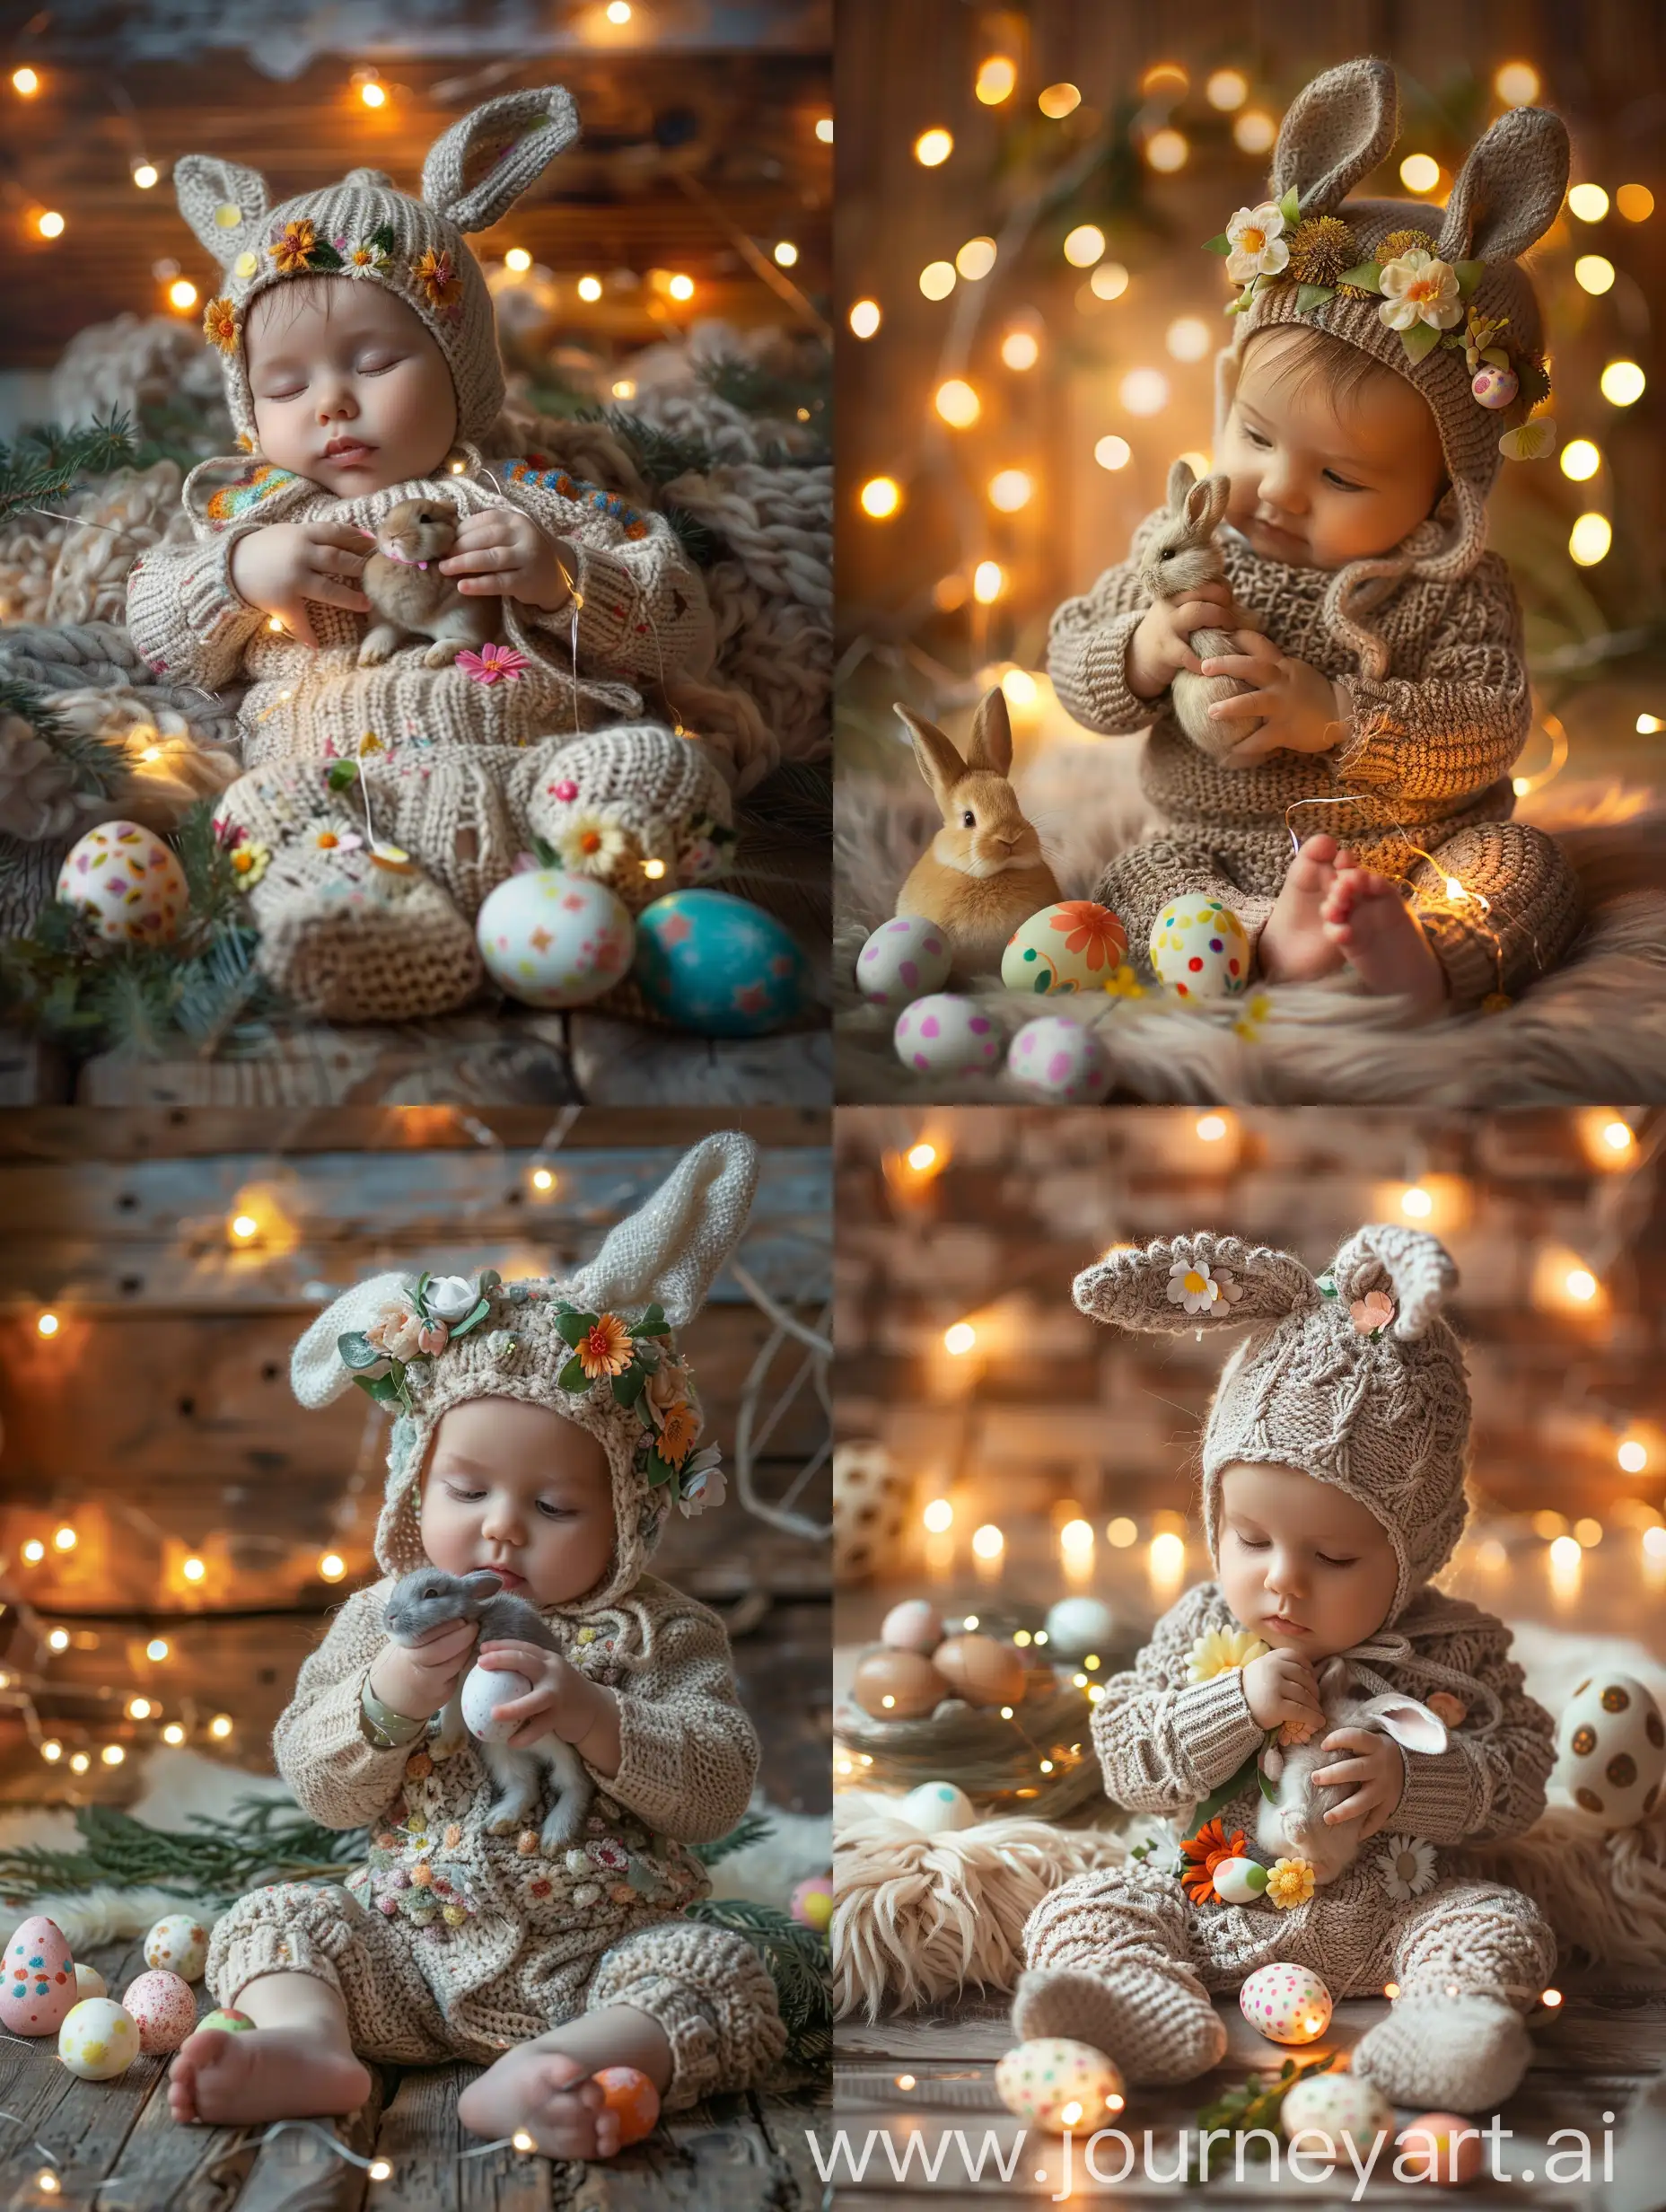 Adorable-Easter-Baby-in-Bunny-Suit-with-Rabbit-and-Eggs